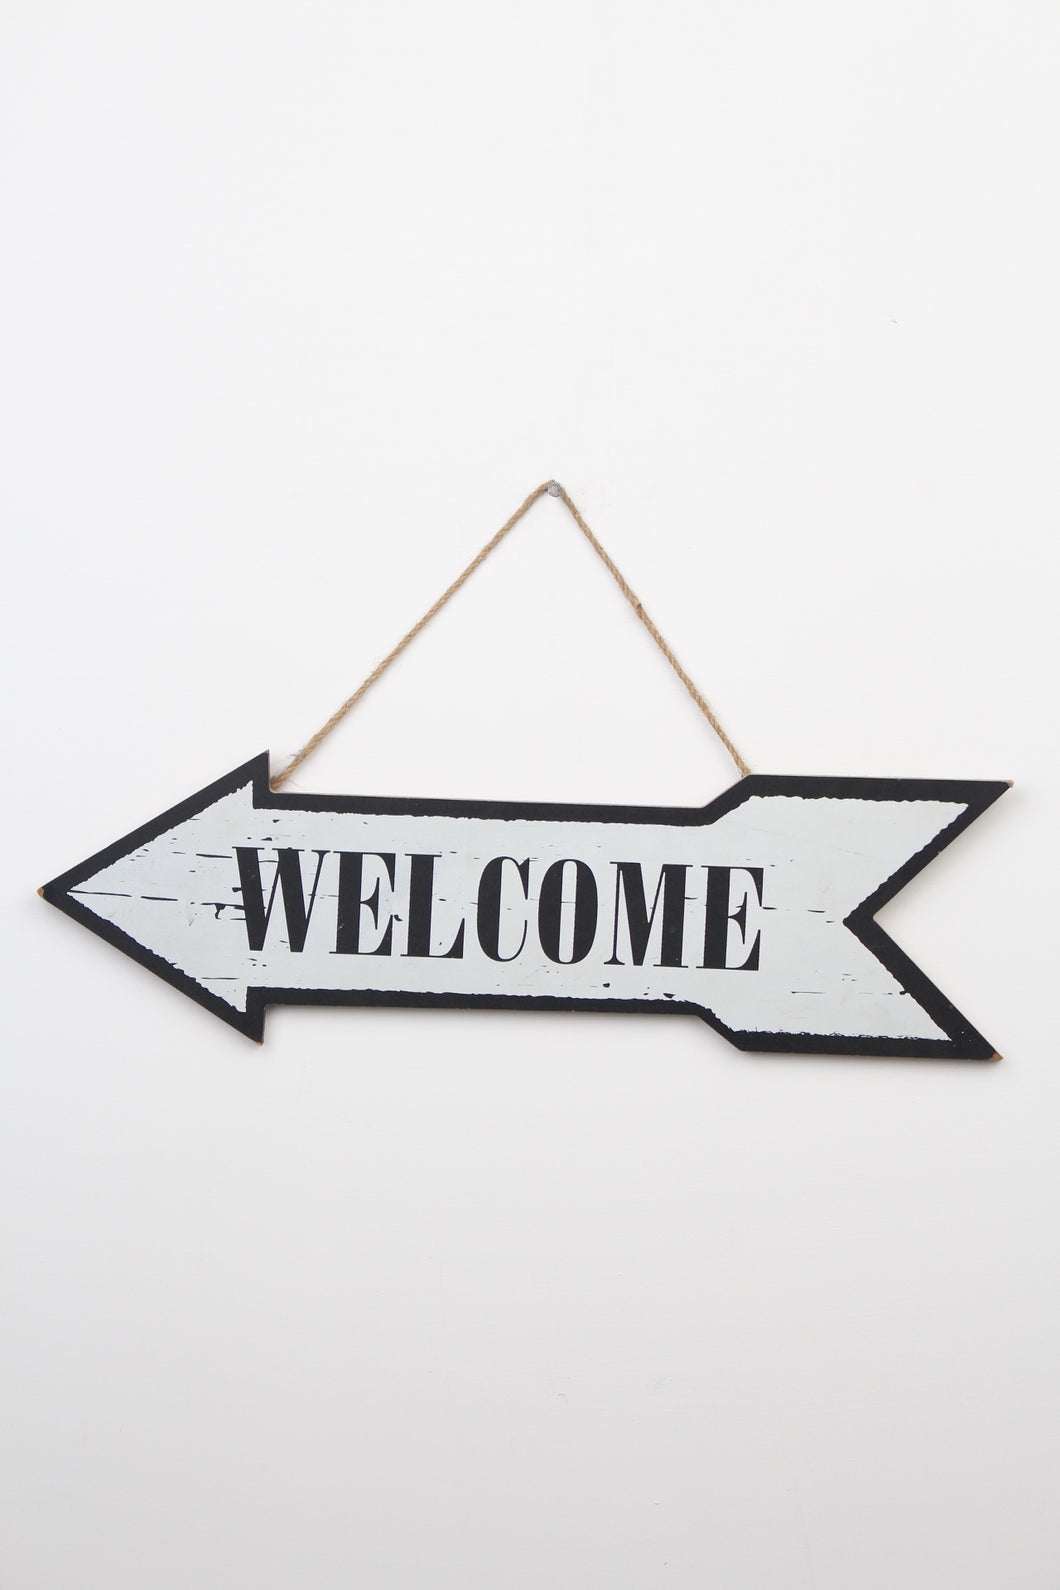 Black & White Wooden Hanging Arrow with Welcome Sign - GS Productions